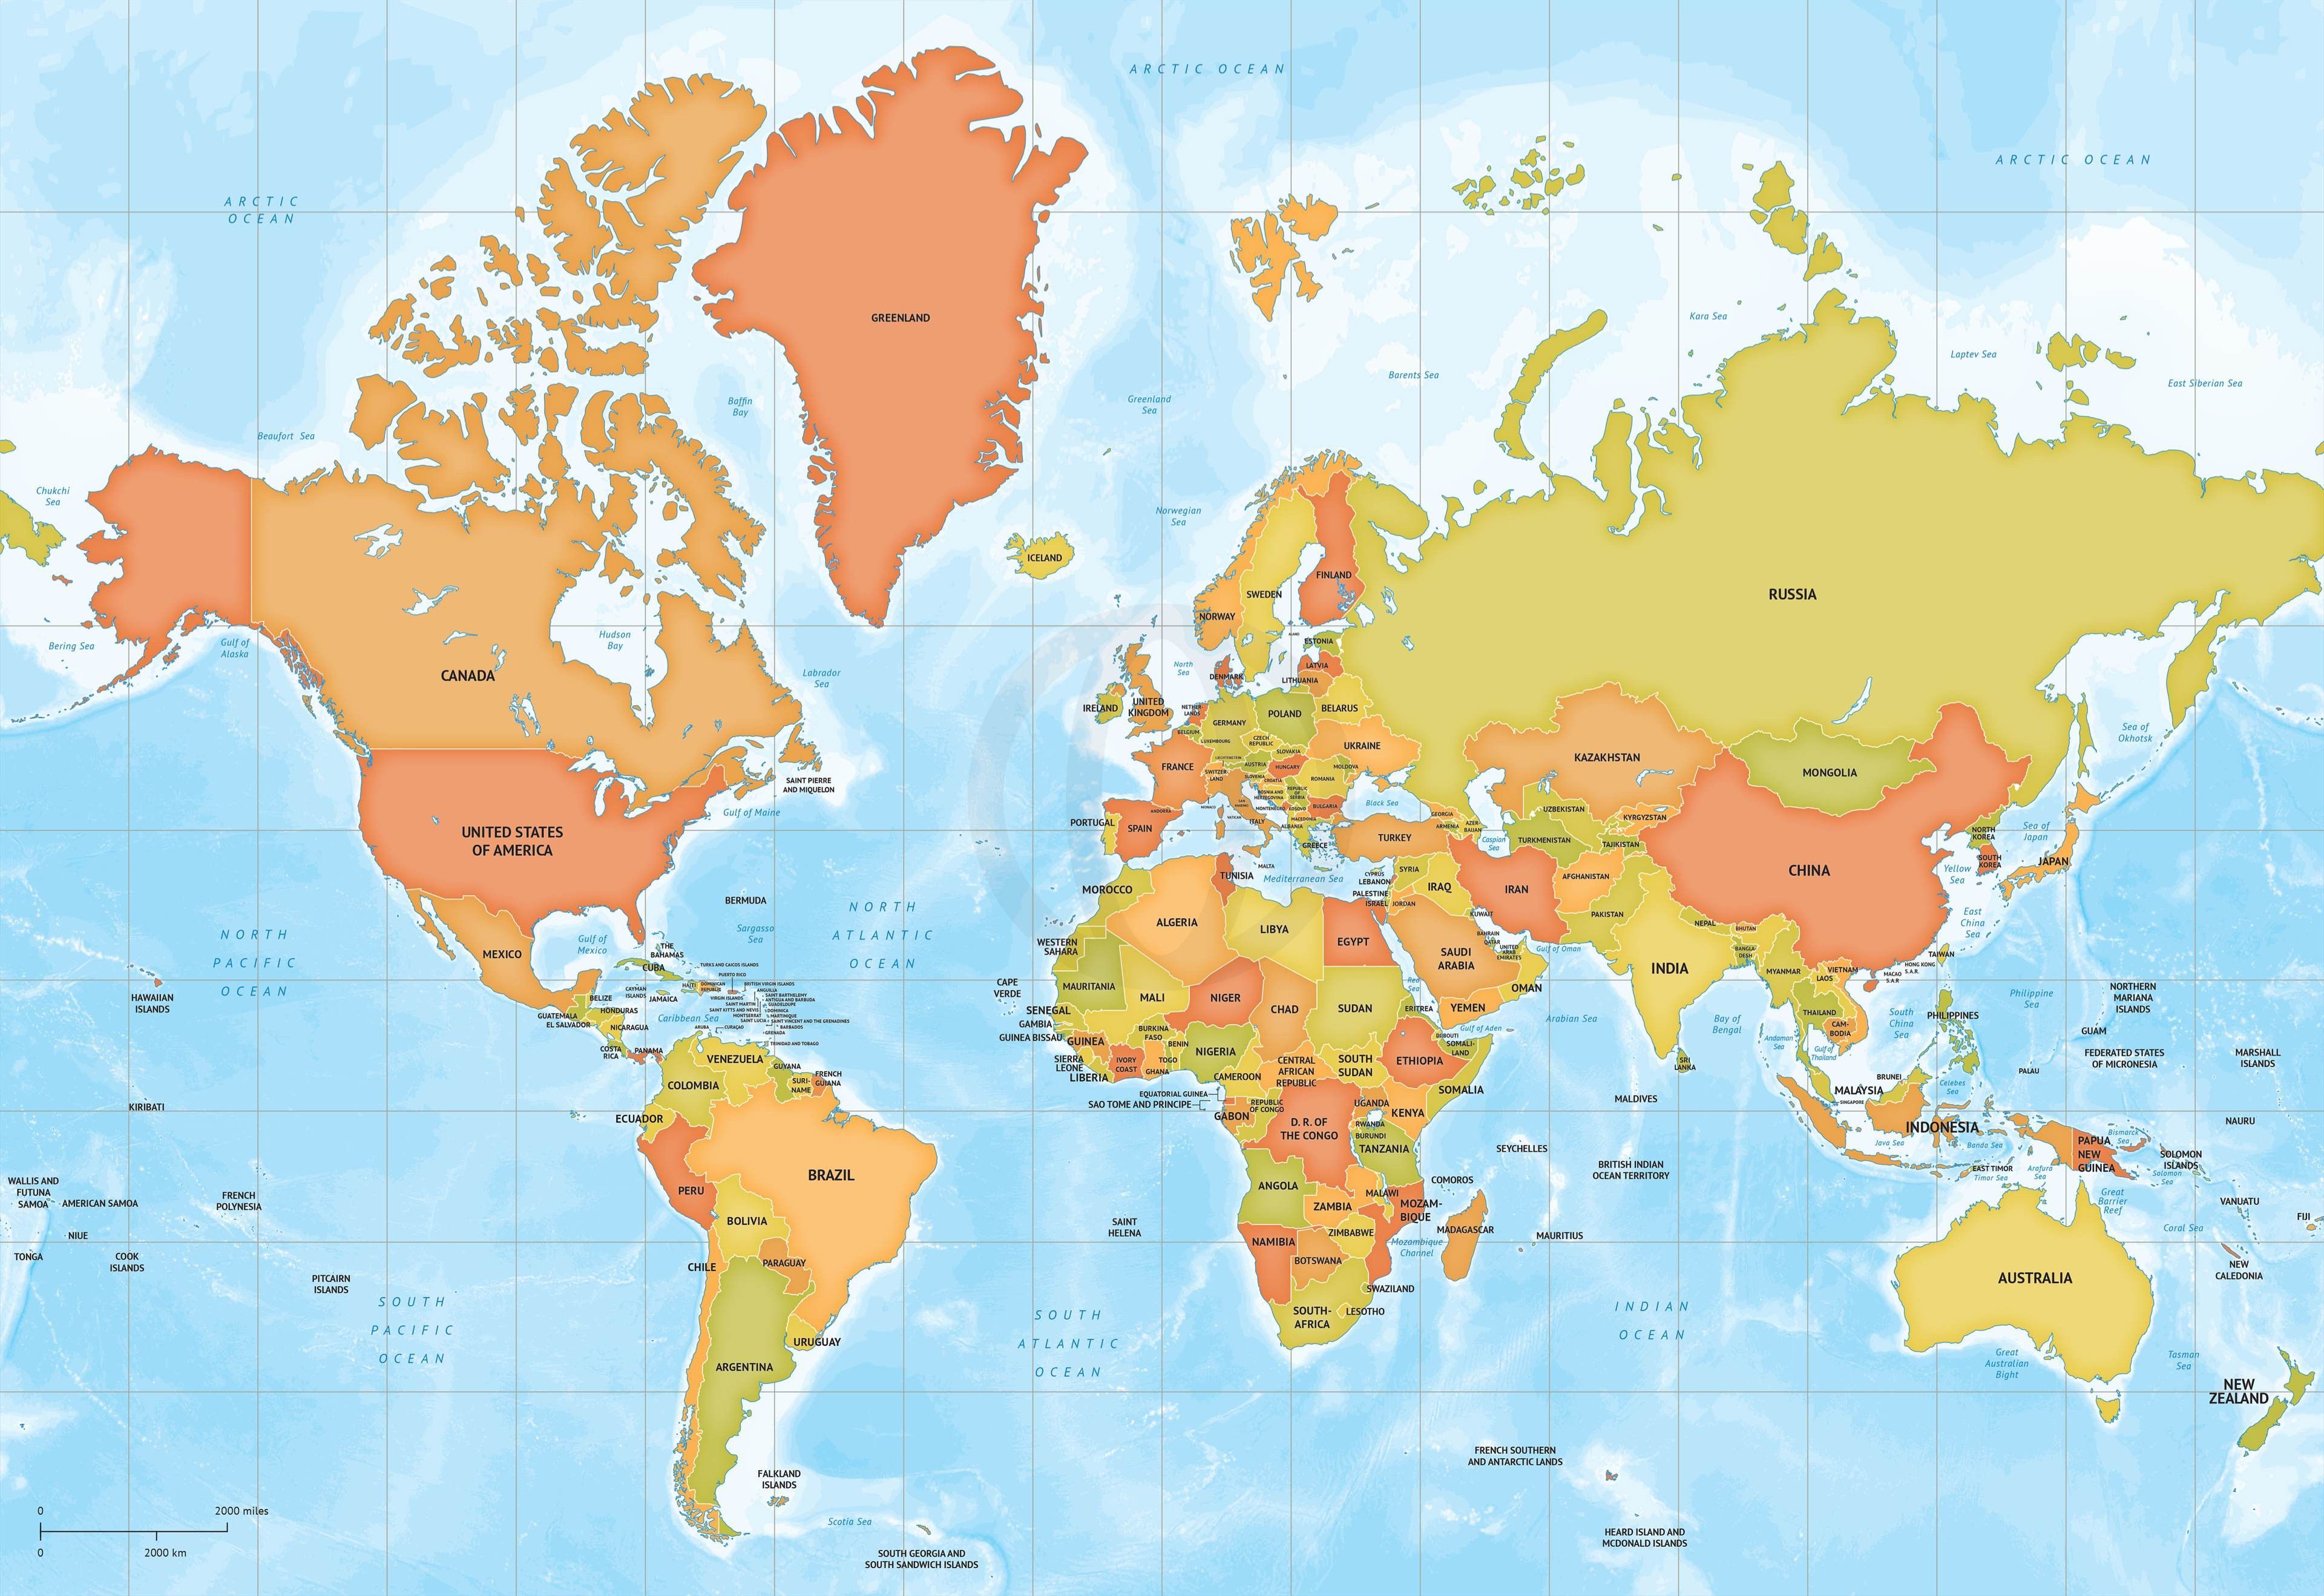 World Map 1080P Pdf High Resolution Picture Of World Map High Quality World Map Wallpaper Europe Map Download High R. Color world map, World map picture, Asia map